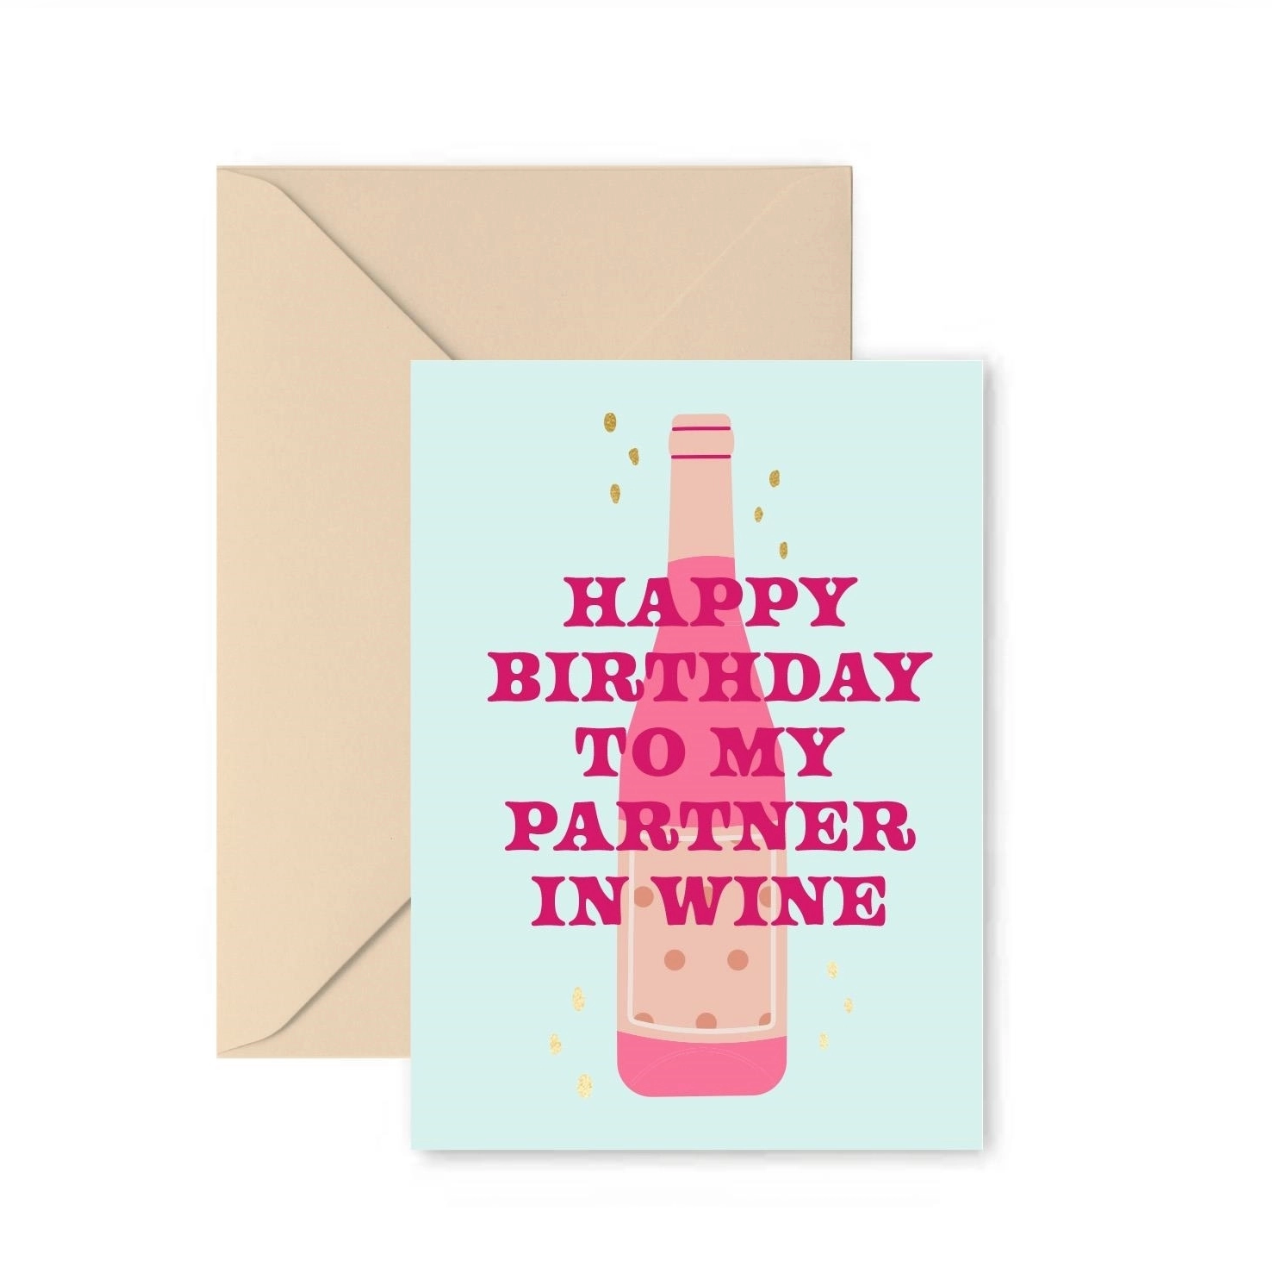 HBD to my partner in wine Greeting Card